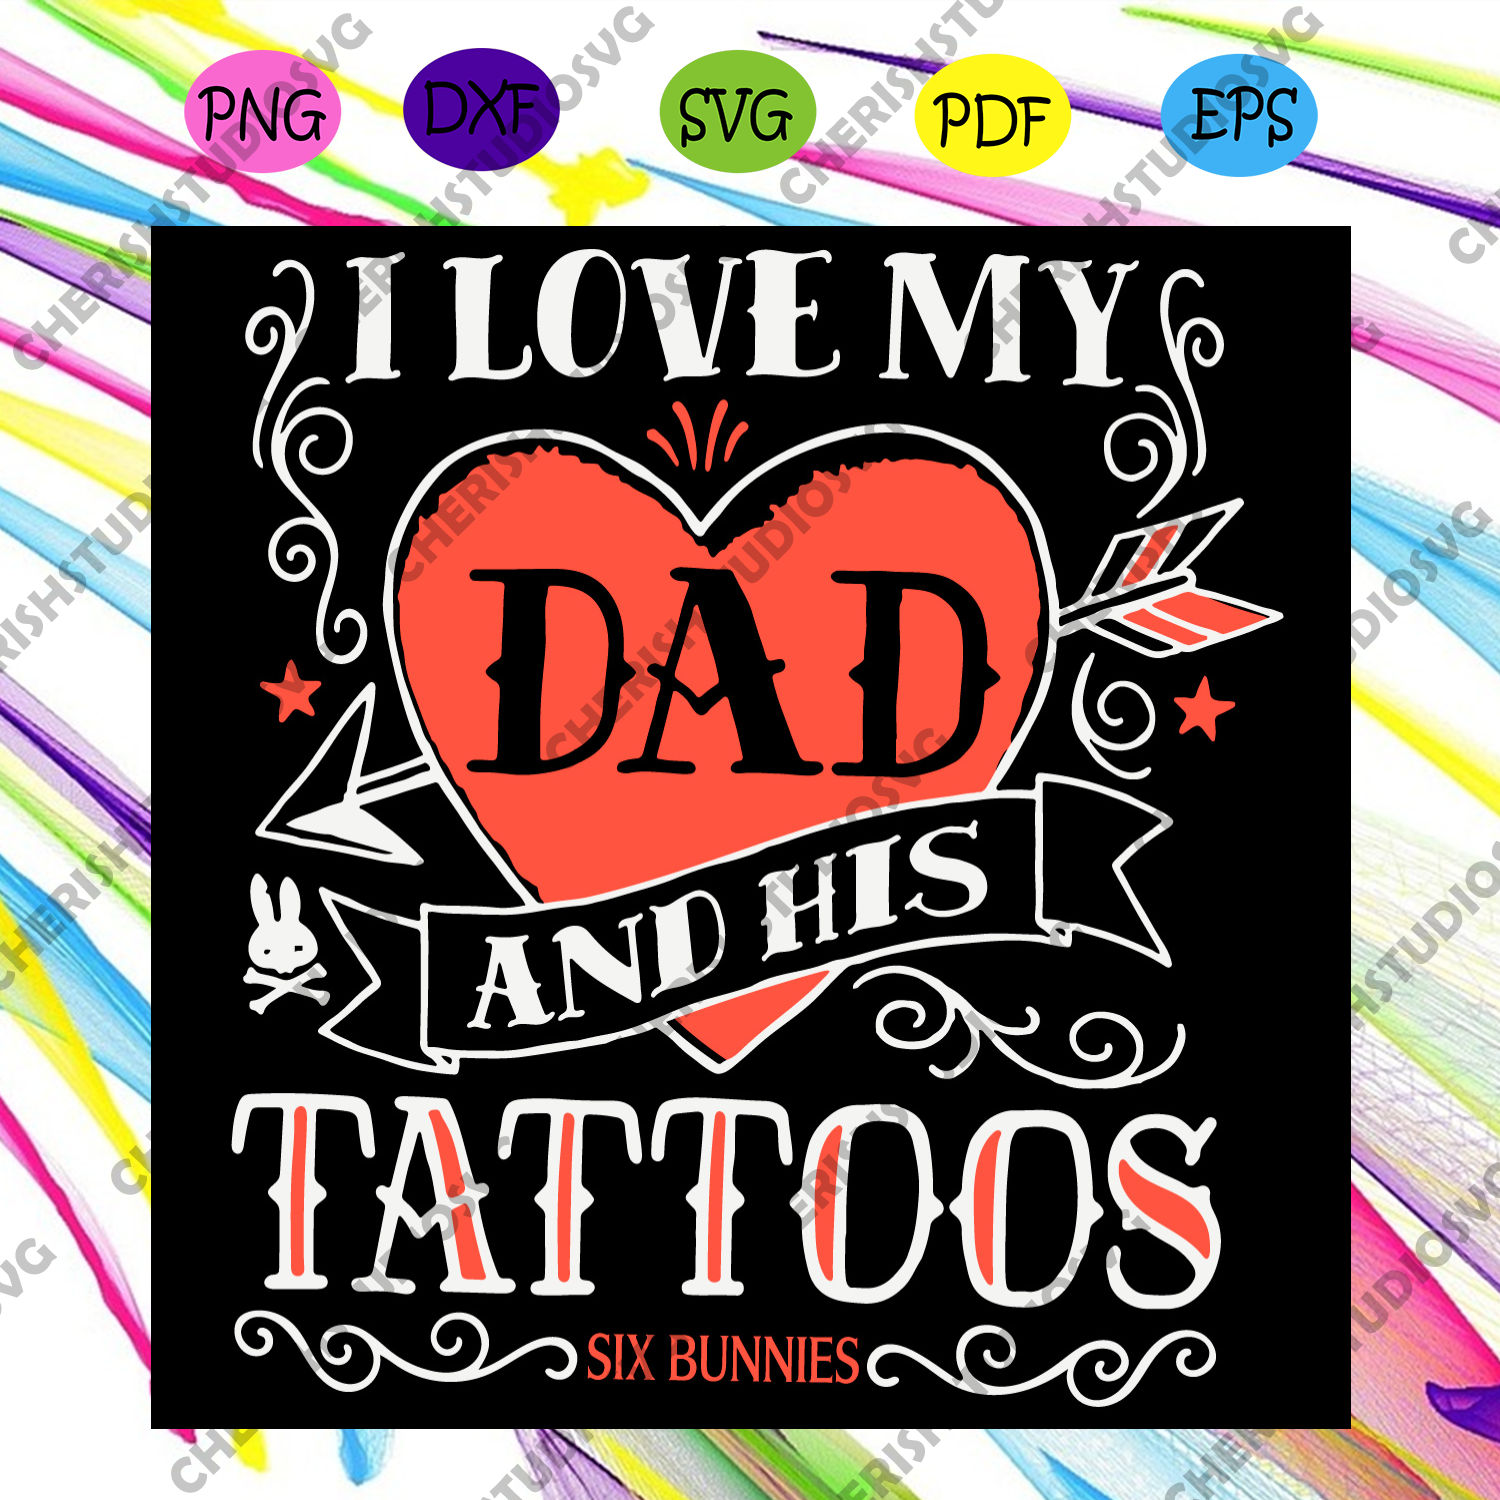 Download I Love My Dad And His Tattoos Svg Fathers Day Svg Dad Svg Tattoos D Cherishsvgstudio